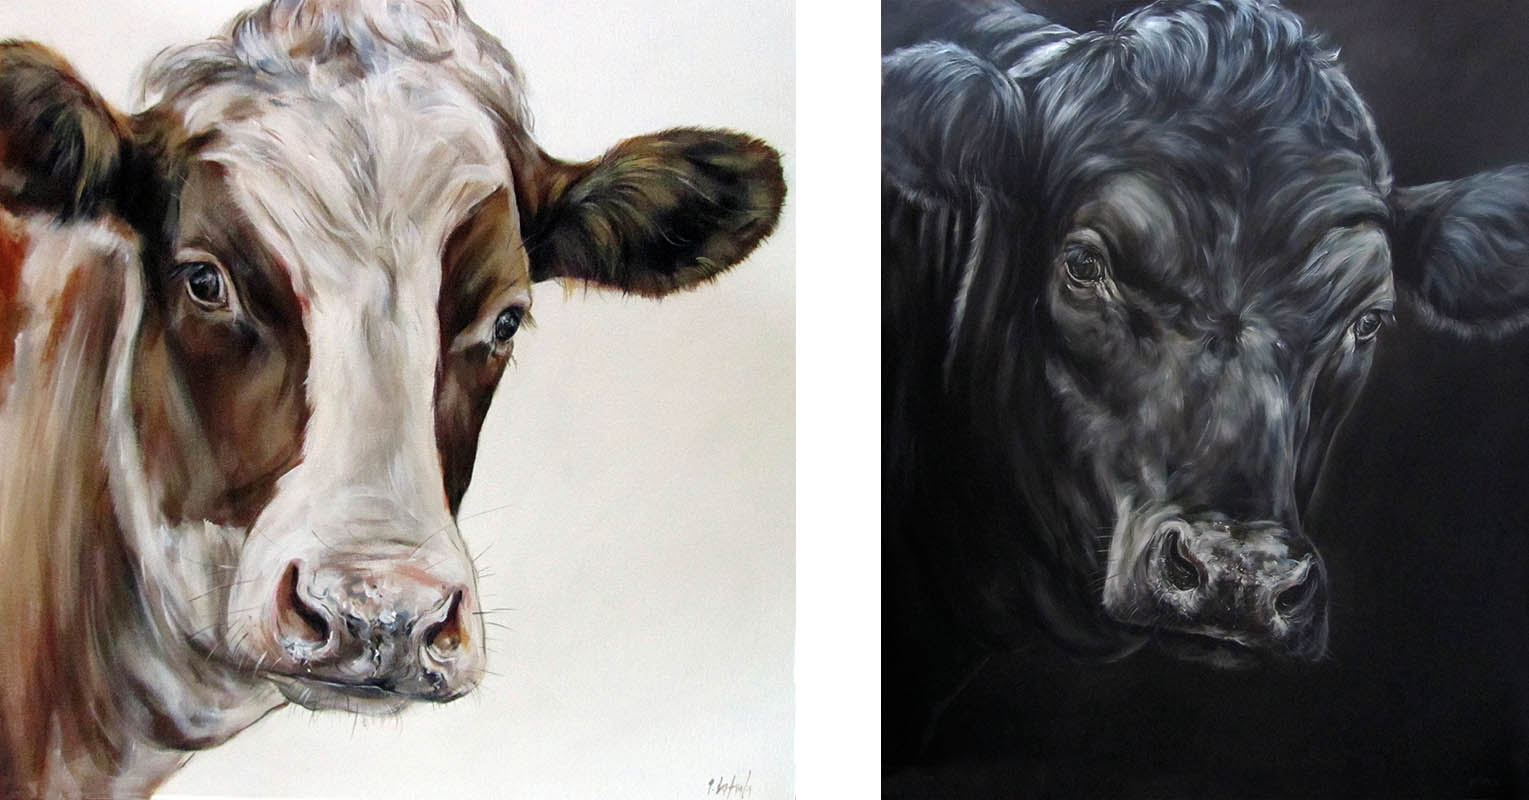 Dreamy (left) and Tupelo Honey (right) by Päivi Latvala, Artist of the Month: Finland, Scan Magazine September 2019